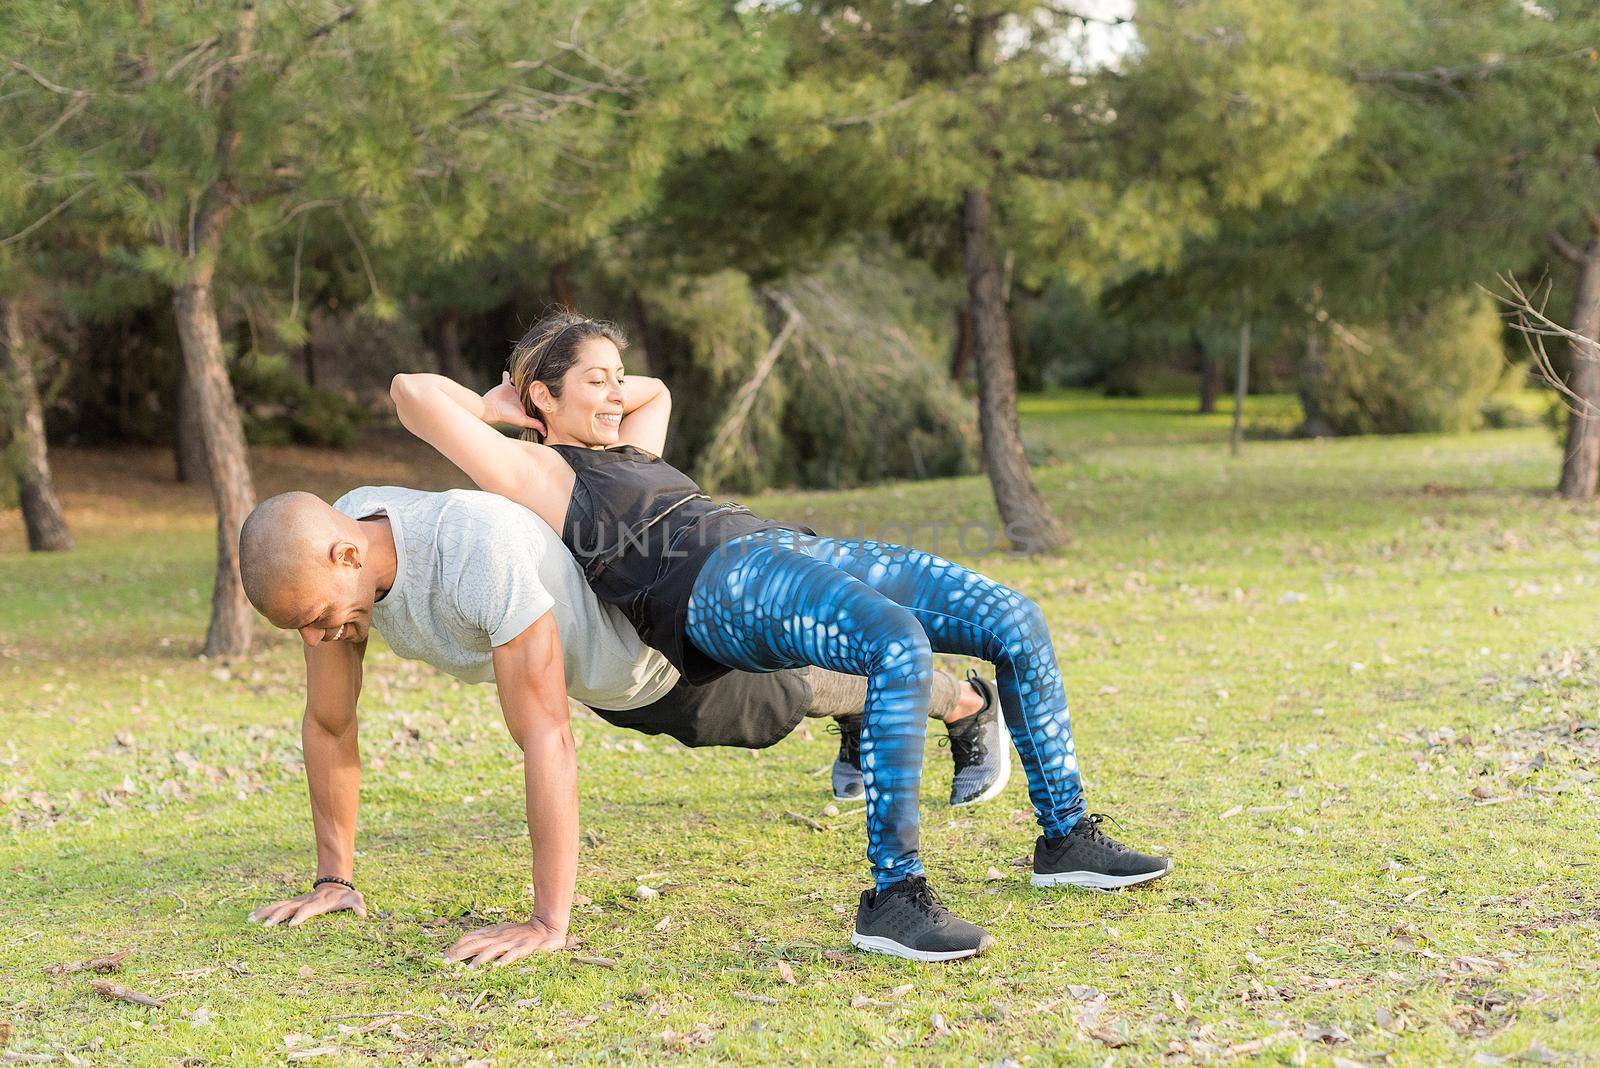 Fitness couple doing back to back lifting exercise in the park. Multi-ethnic people exercising outdoors.